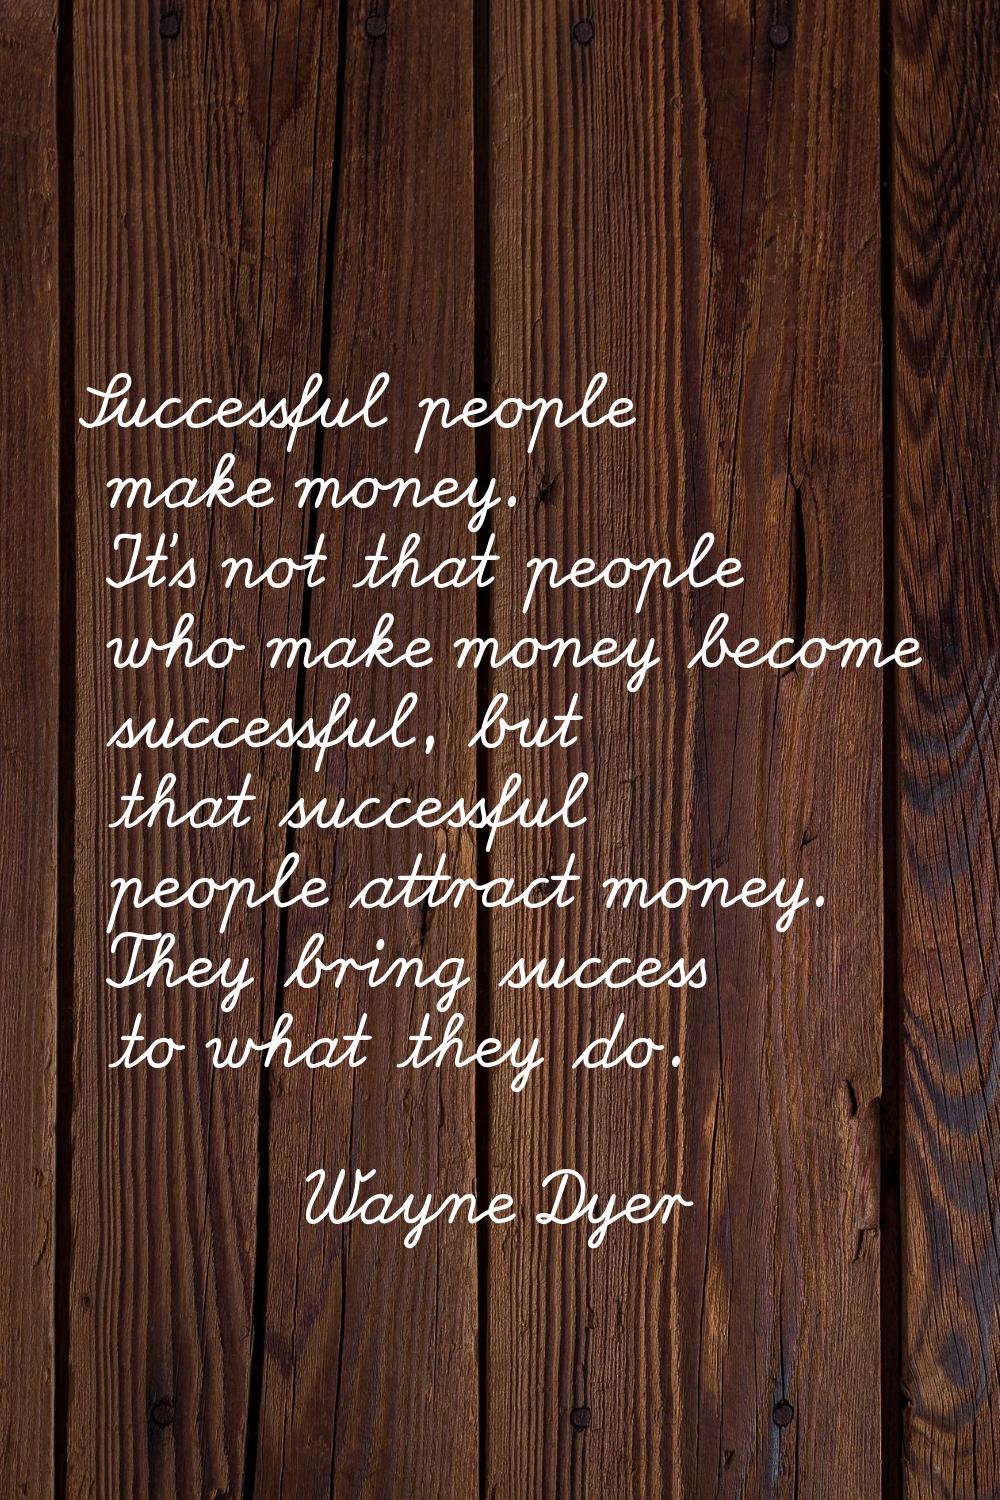 Successful people make money. It's not that people who make money become successful, but that succe